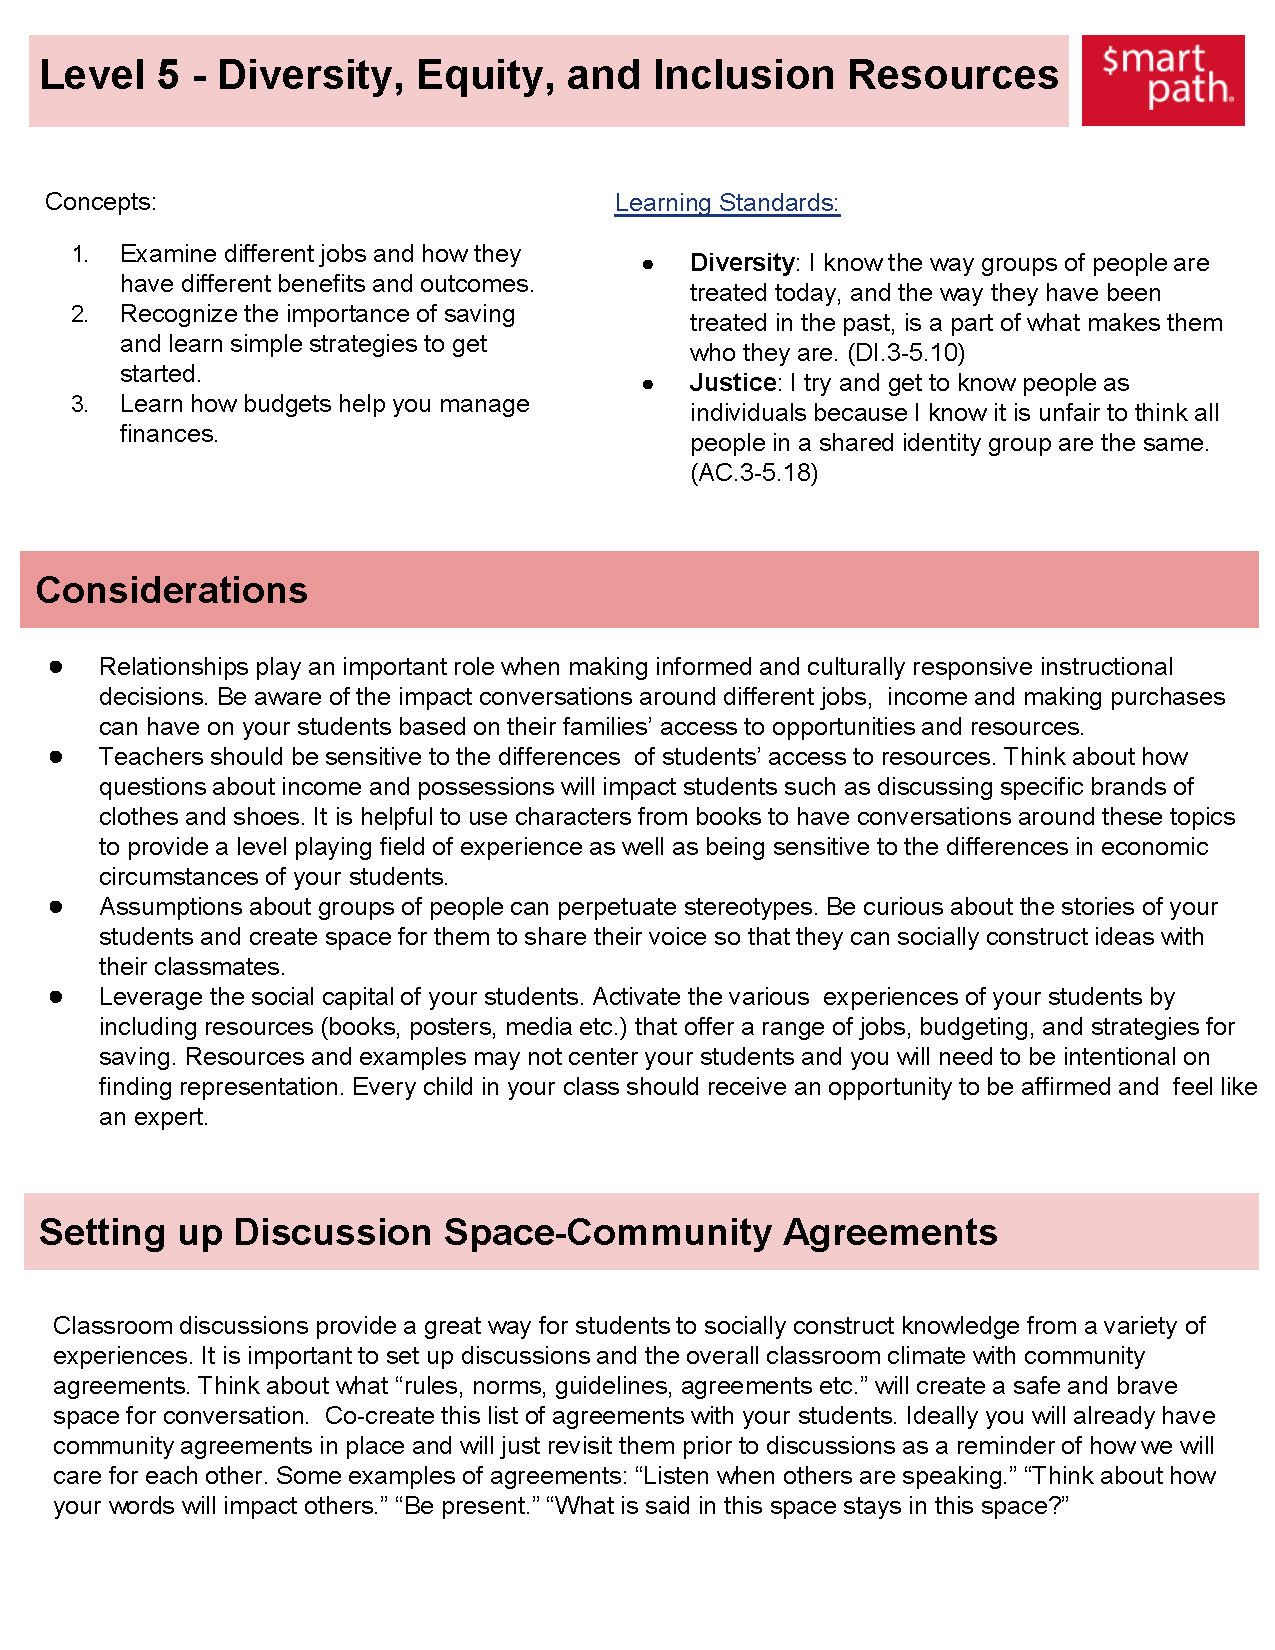 Level Five Diversity and Equity Guide_Page_1